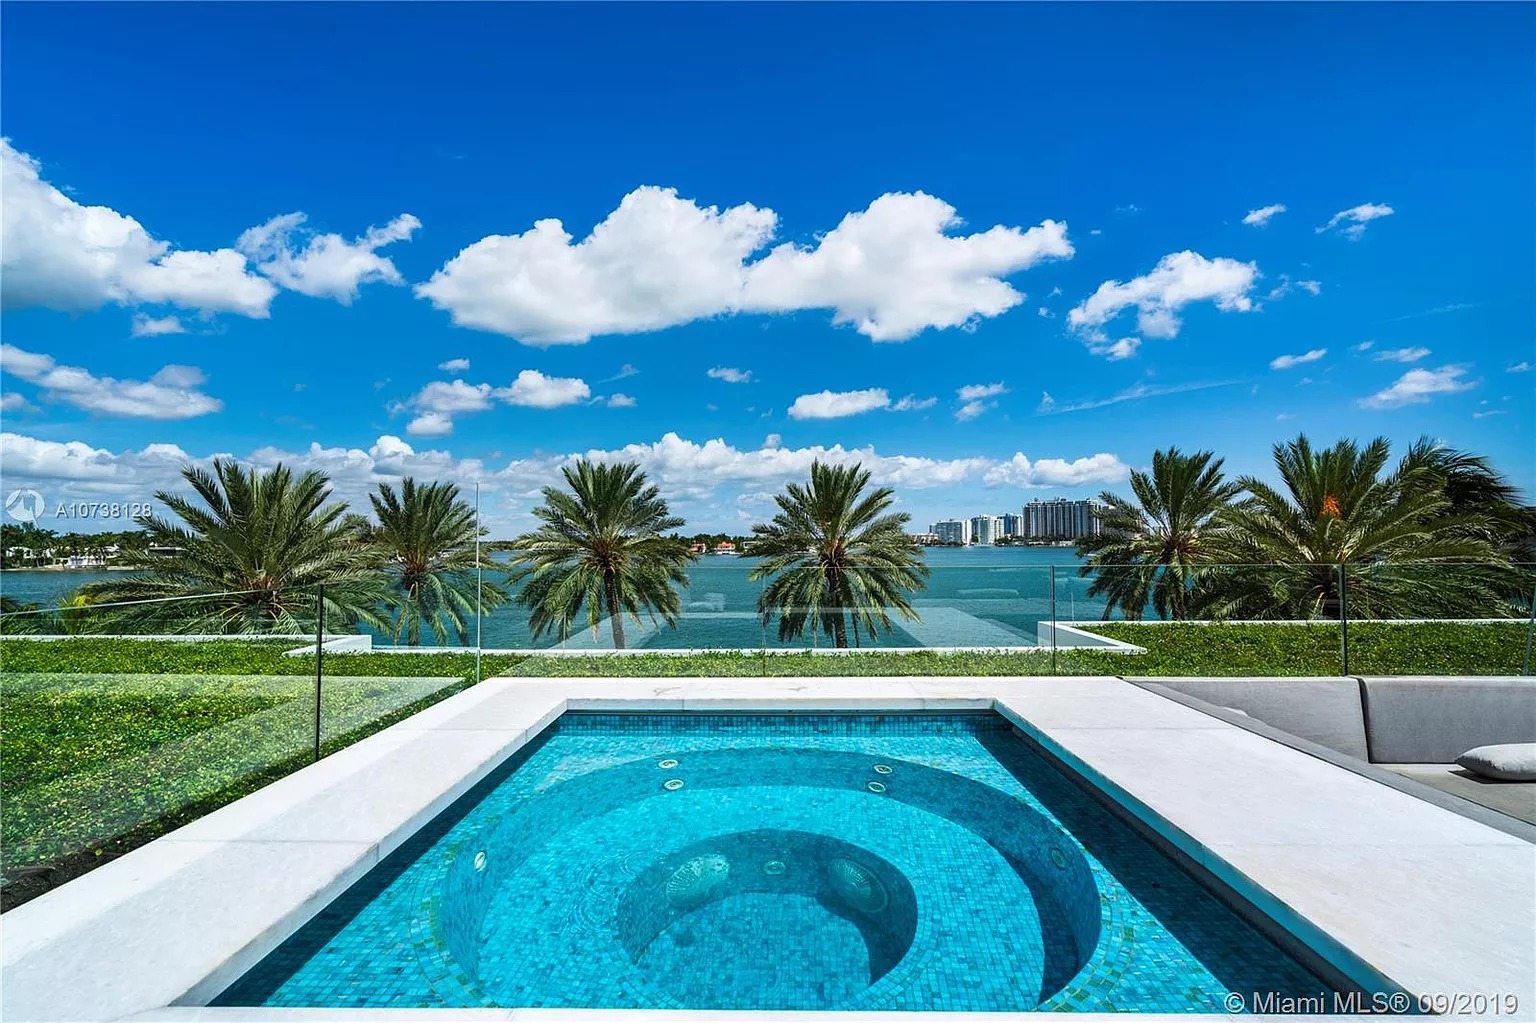 101 N Hibiscus Dr, Miami Beach, FL 33139 - $25,900,000 home for sale, house images, photos and pics gallery